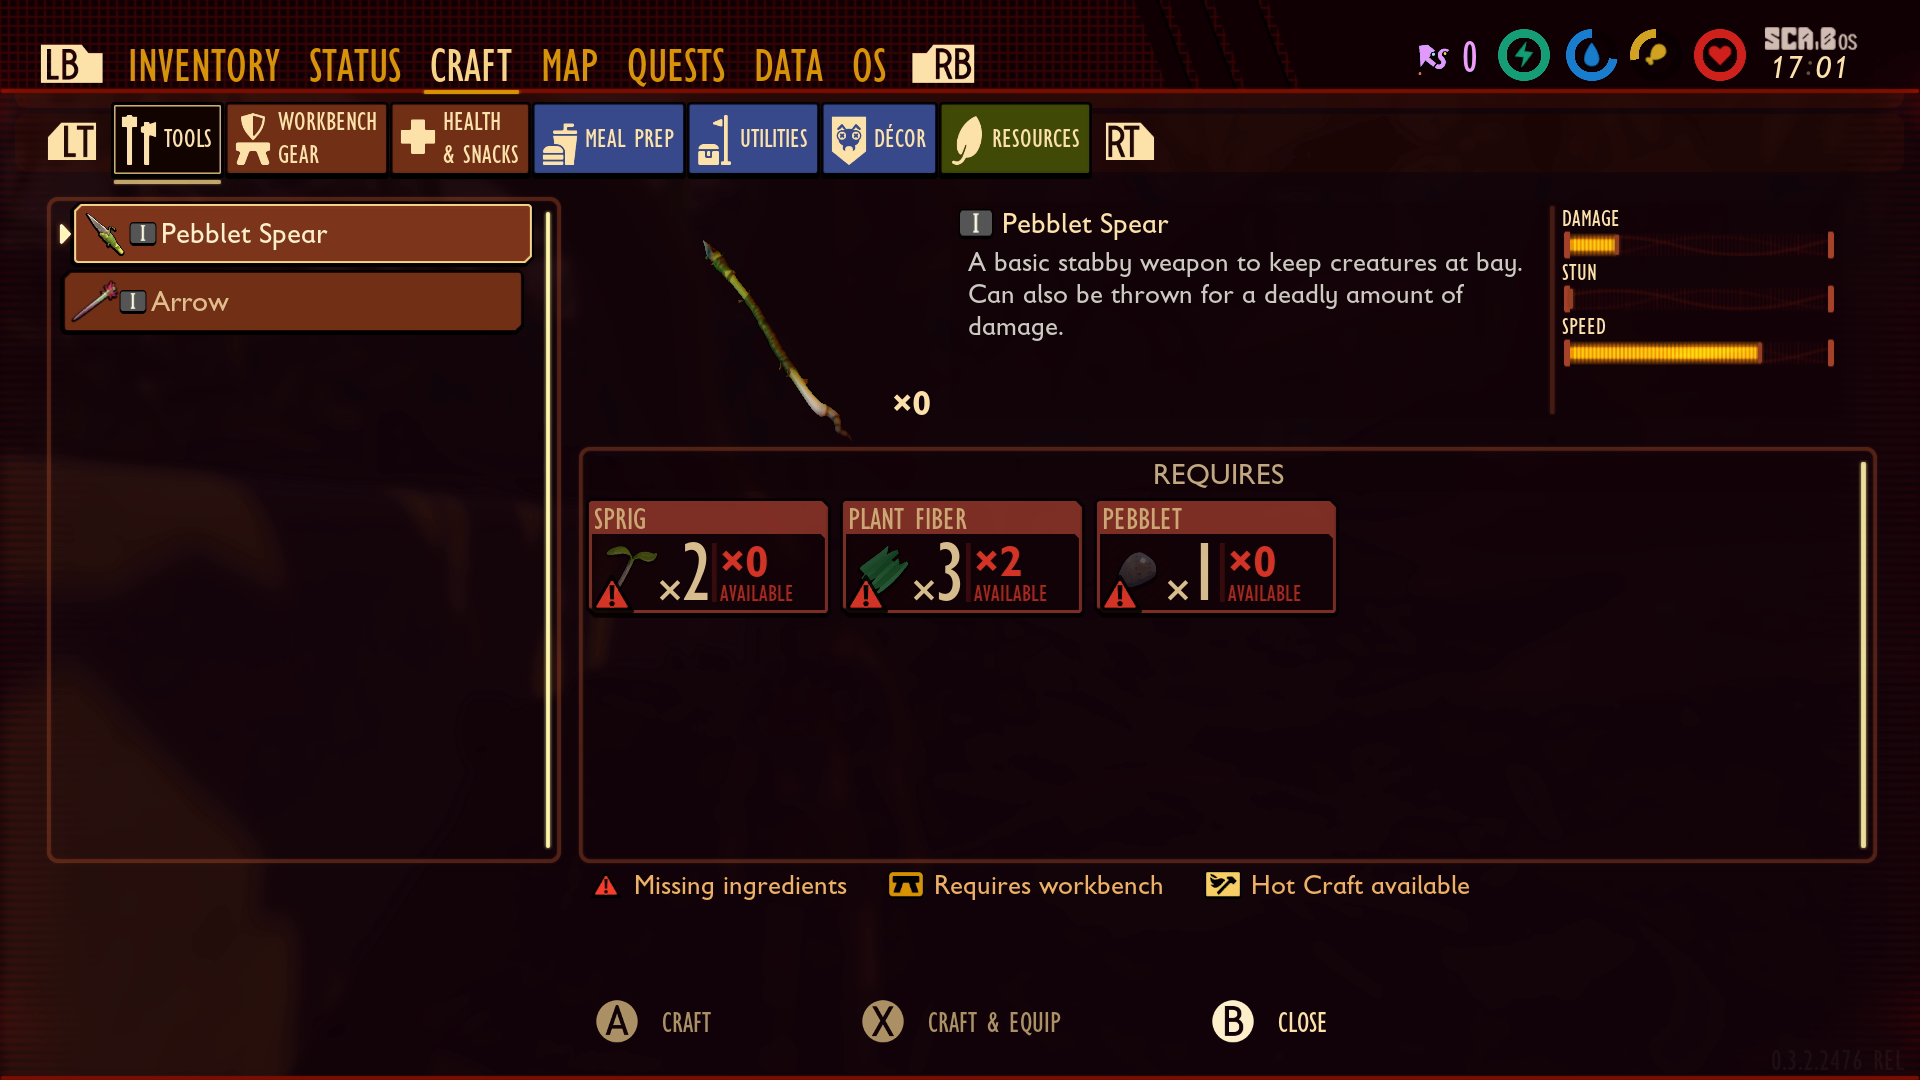 The Grounded crafting menu. There are seven tabs: tools, workbench gear, health and snacks, meal prep, utilities, decor, and resources. Next to each tab title is a symbol. Next to tools is the silhouette of a hammer. Next to workbench gear is a shield over a bench. Next to health and snacks is a plus sign. The Pebblet Spear is selected for crafting, but the player doesn't have enough ingredients. This is indicated by showing how many are needed, how many are available, a red triangular caution symbol next to the item, and the number available is red.